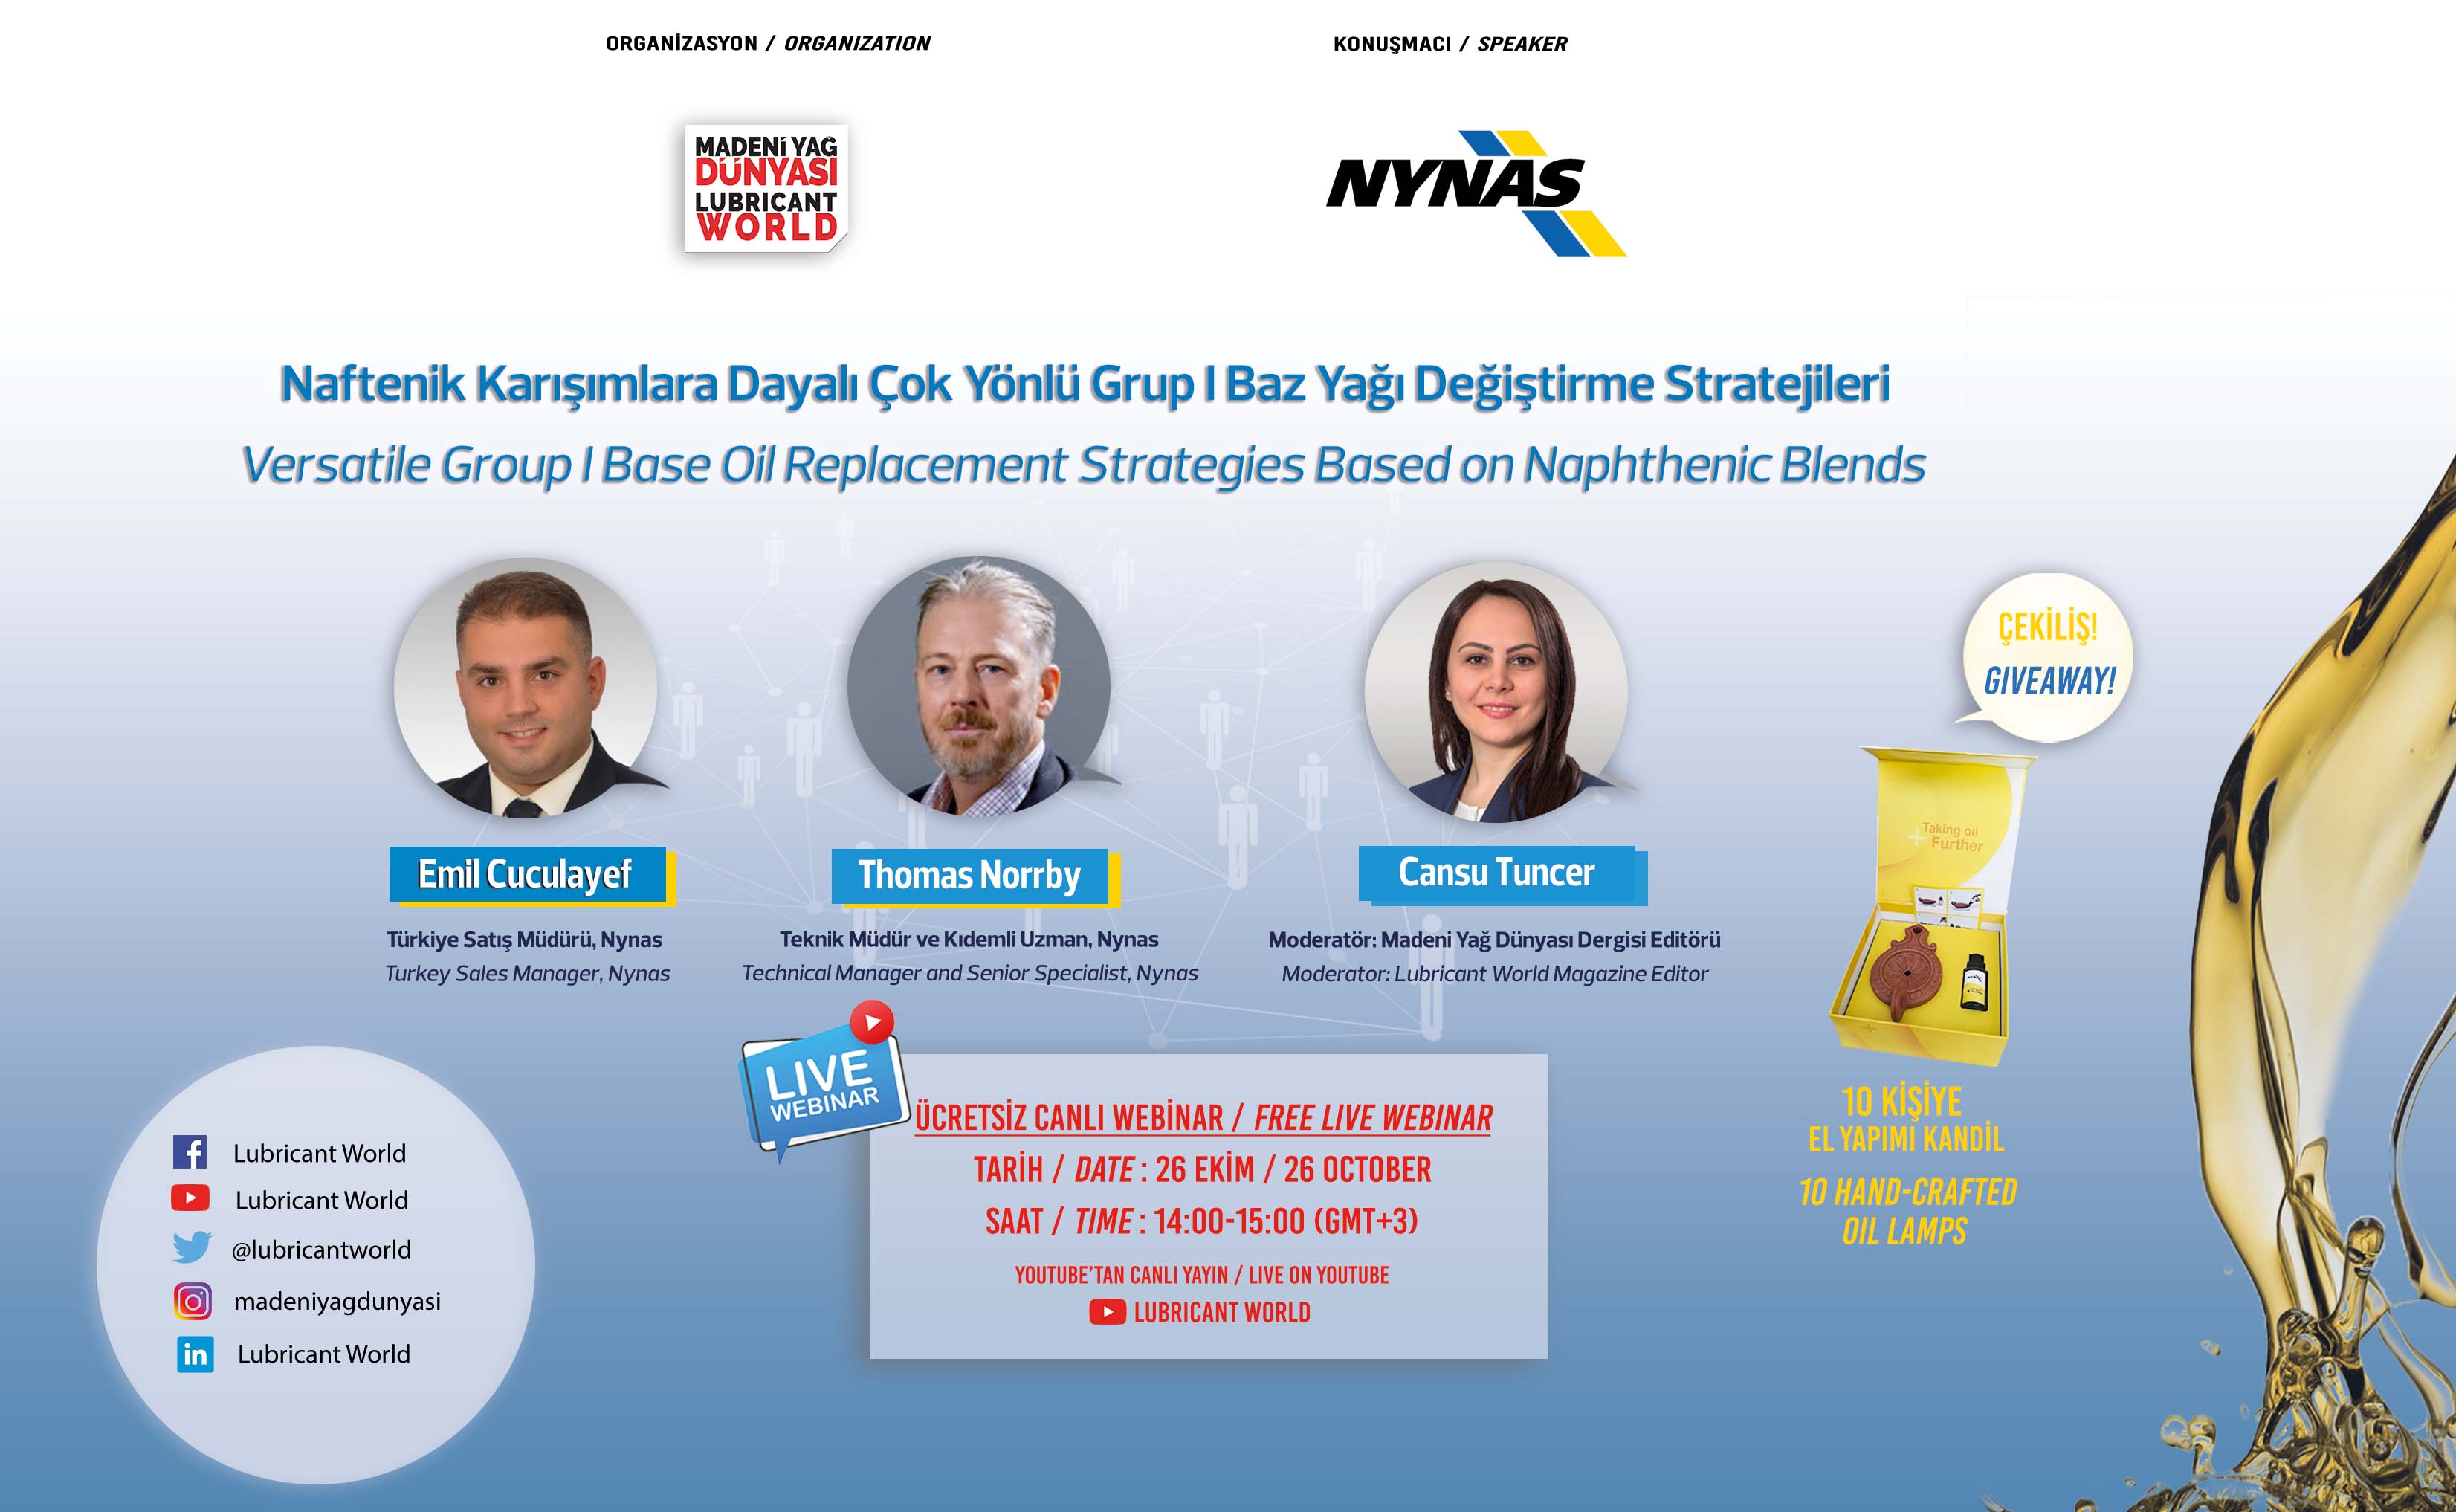 Lubricant World brings you together with Nynas in a webinar